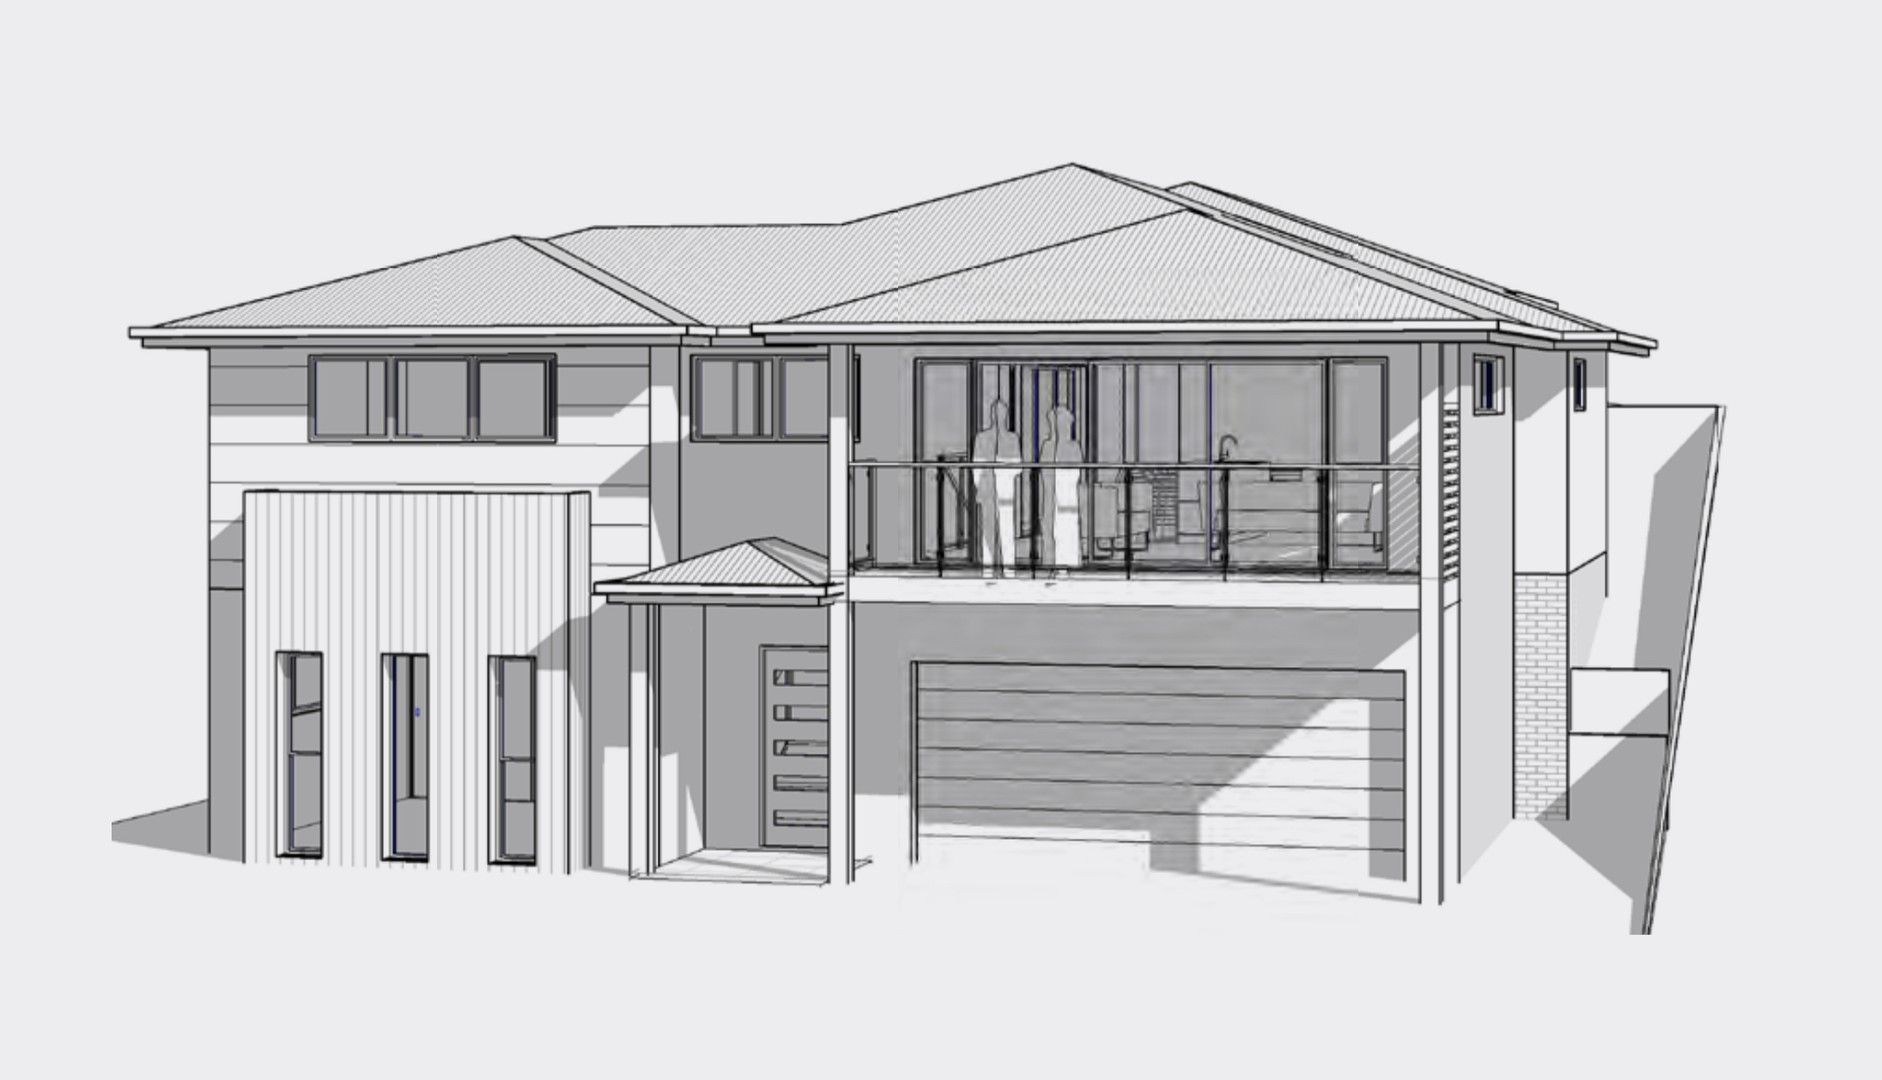 4 bedrooms New House & Land in Pacific Drive PORT MACQUARIE NSW, 2444